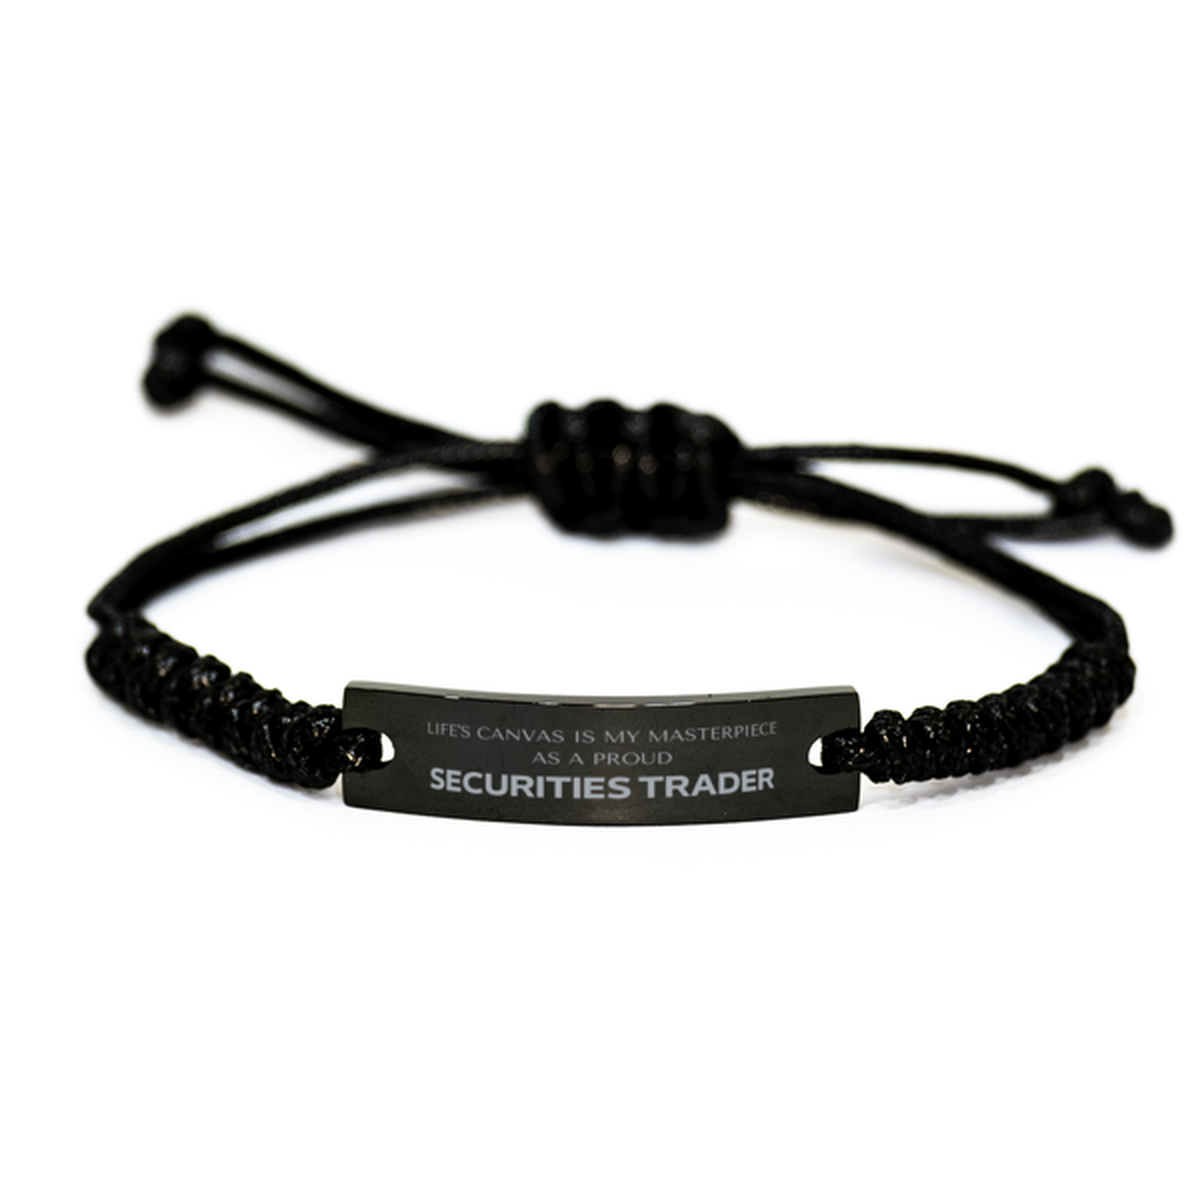 Proud Securities Trader Gifts, Life's canvas is my masterpiece, Epic Birthday Christmas Unique Black Rope Bracelet For Securities Trader, Coworkers, Men, Women, Friends